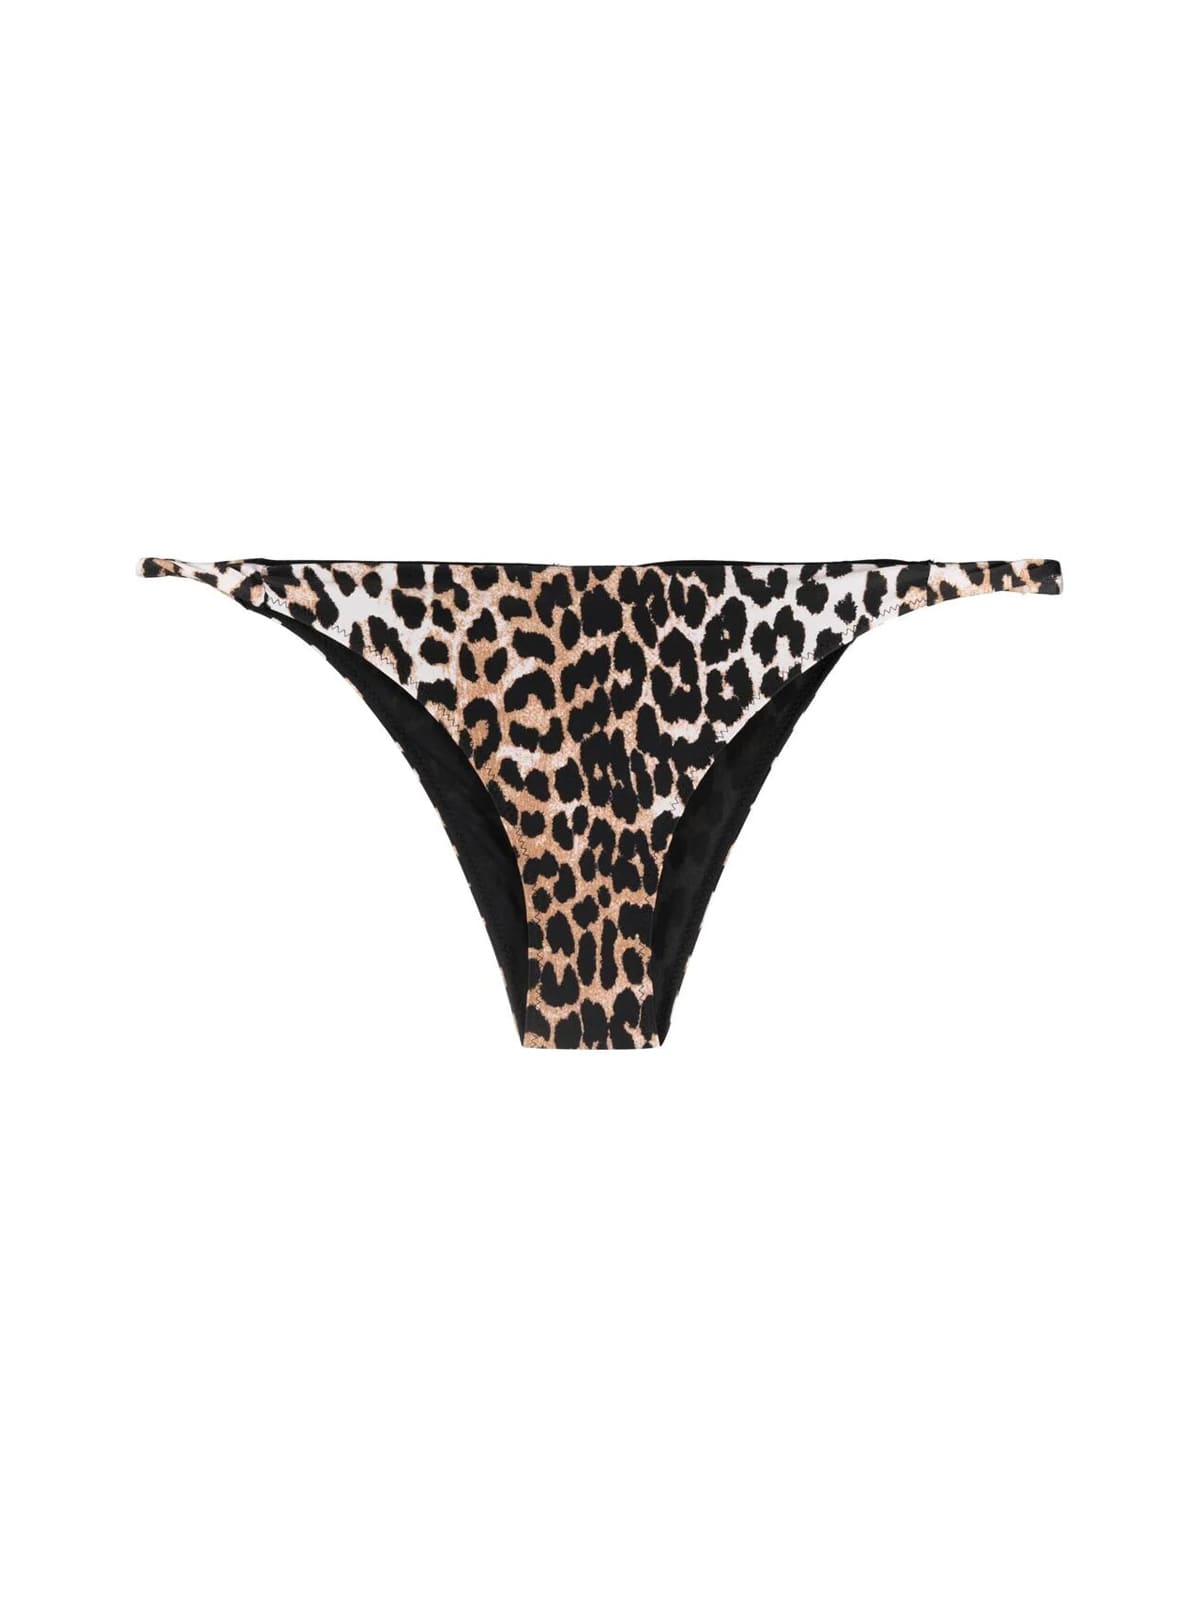 GANNI RECYCLED PRINTED SWIMSLIP,A3250 943 LEOPARD